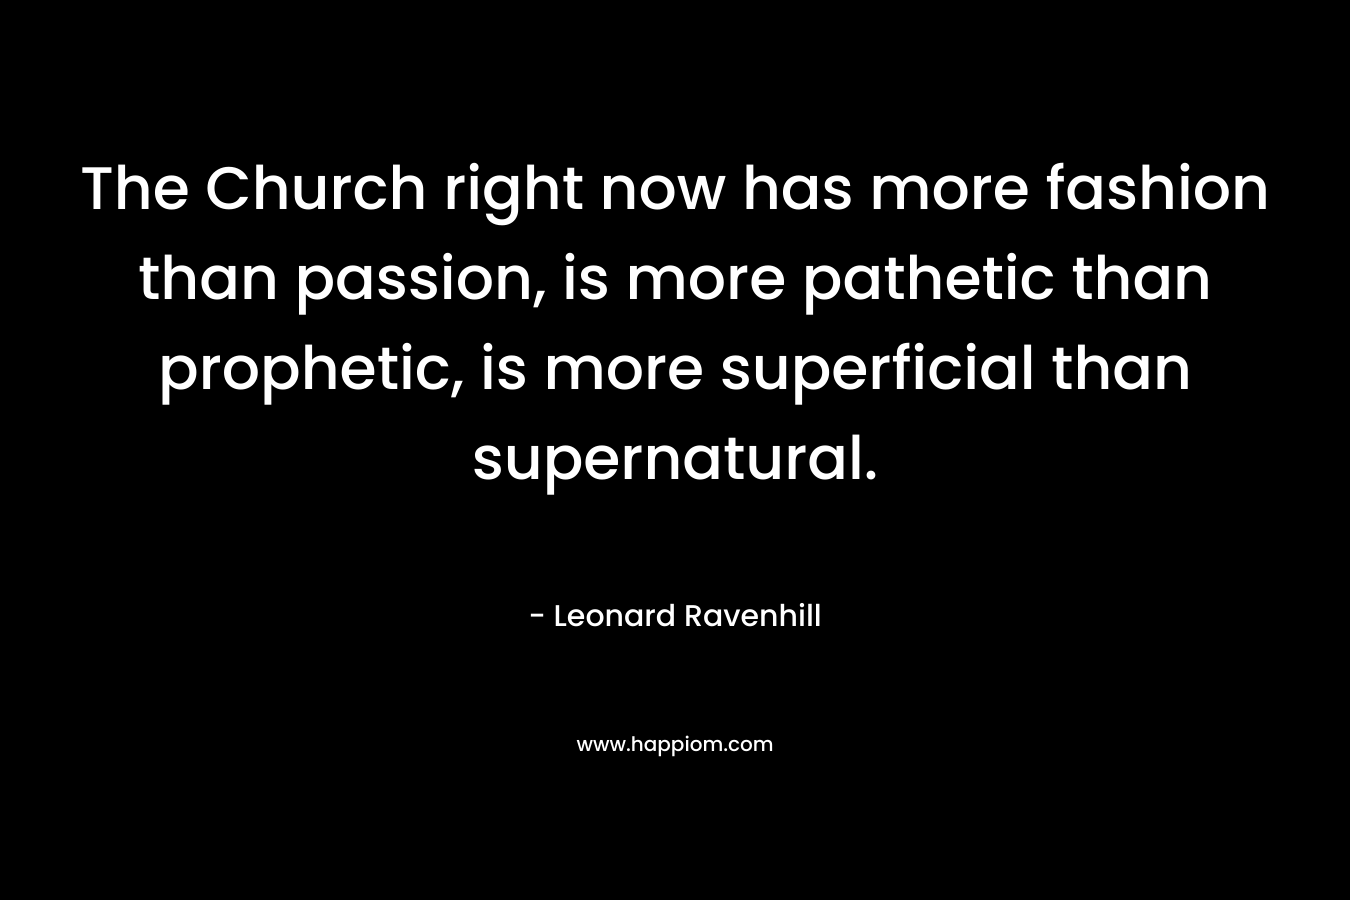 The Church right now has more fashion than passion, is more pathetic than prophetic, is more superficial than supernatural. – Leonard Ravenhill